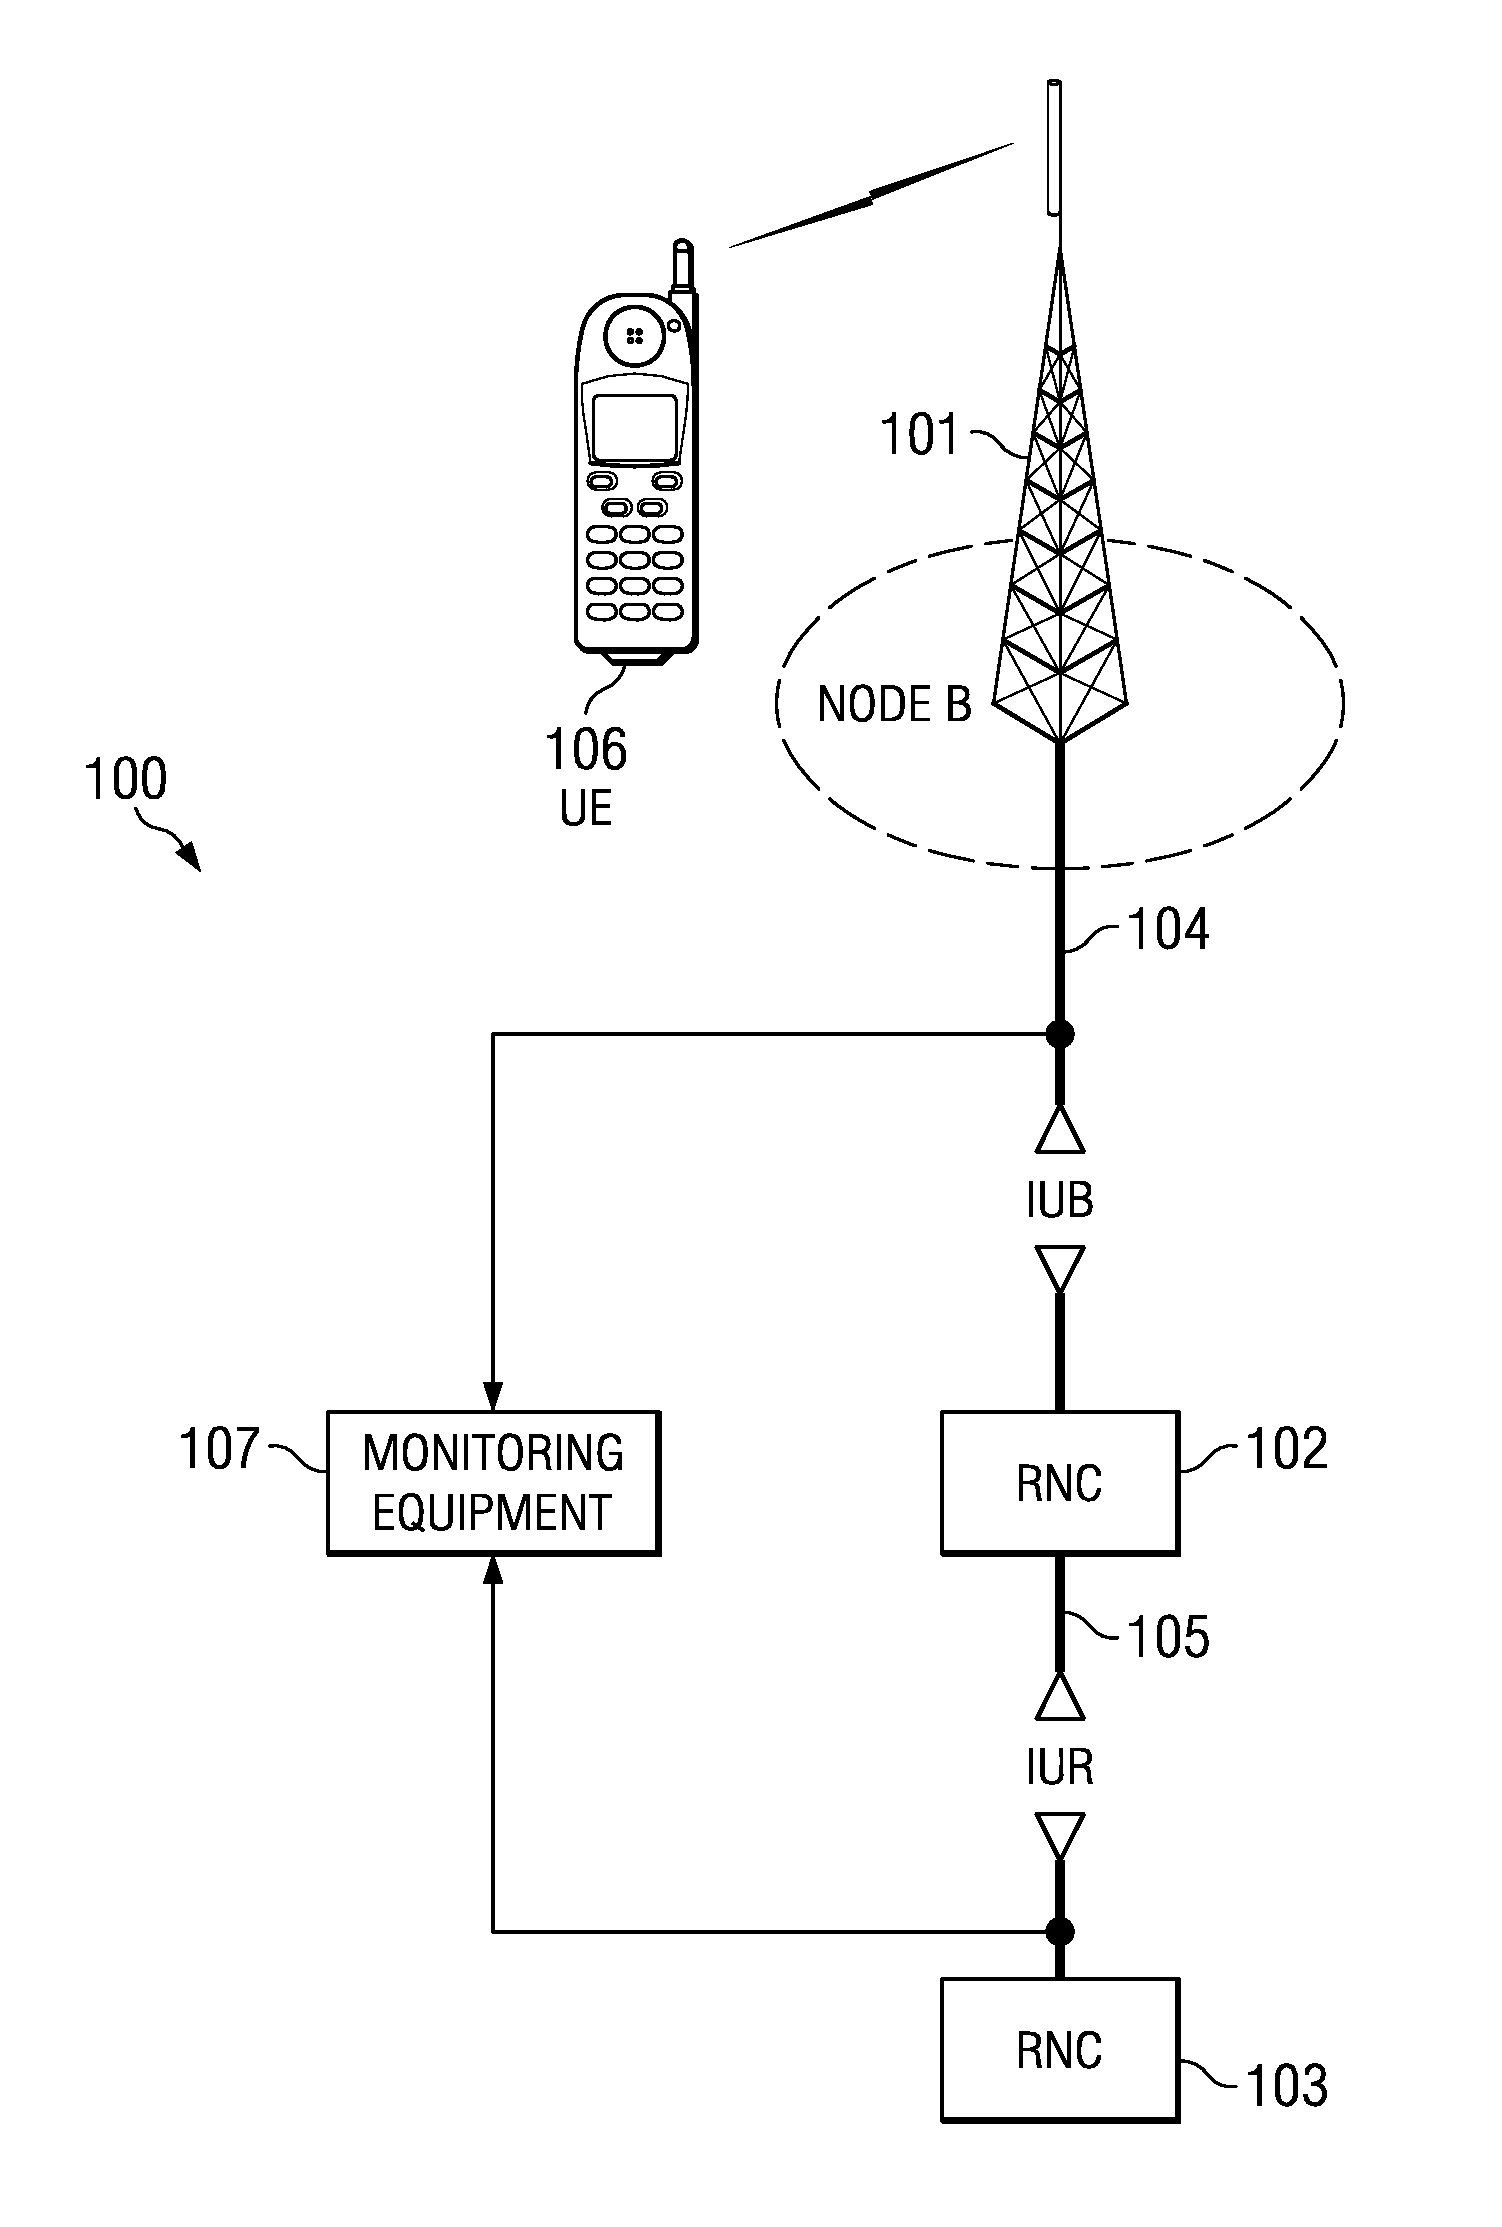 System and method for real-time correlation of aal2 and aal5 messages for calls in utran